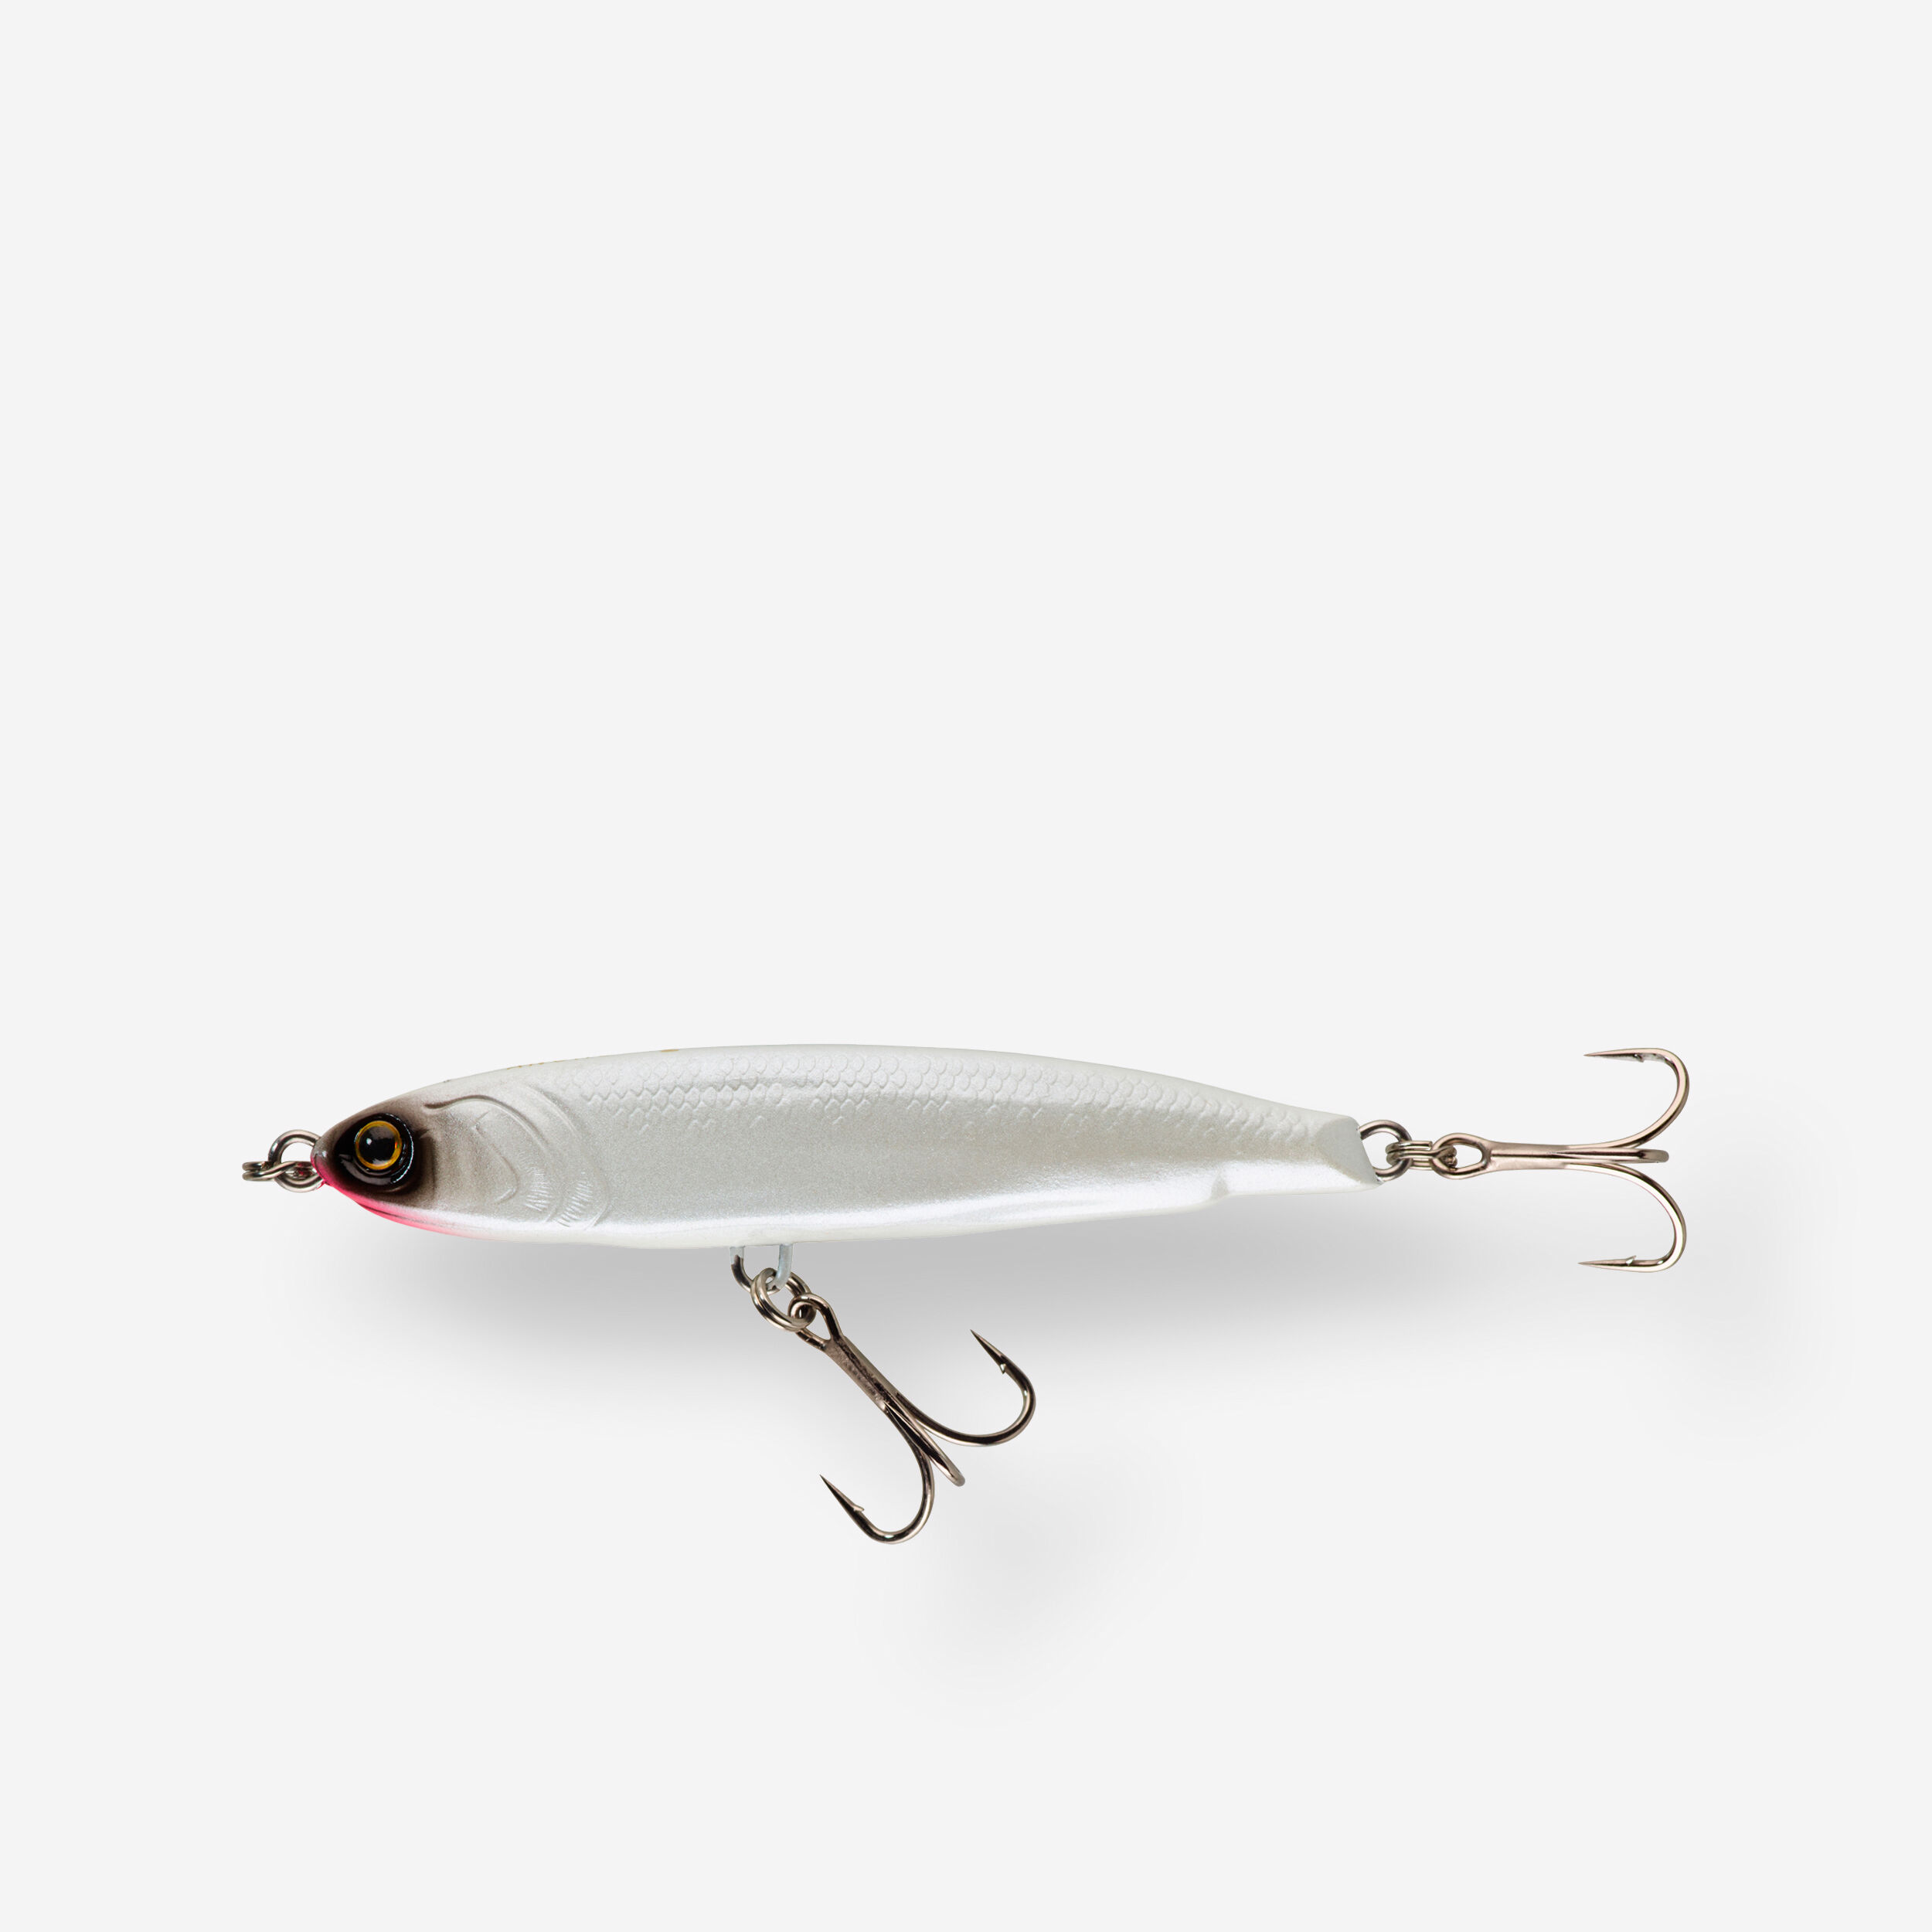 CAPERLAN Sea lure fishing ANCHO LM 95 US WHITE hard lure